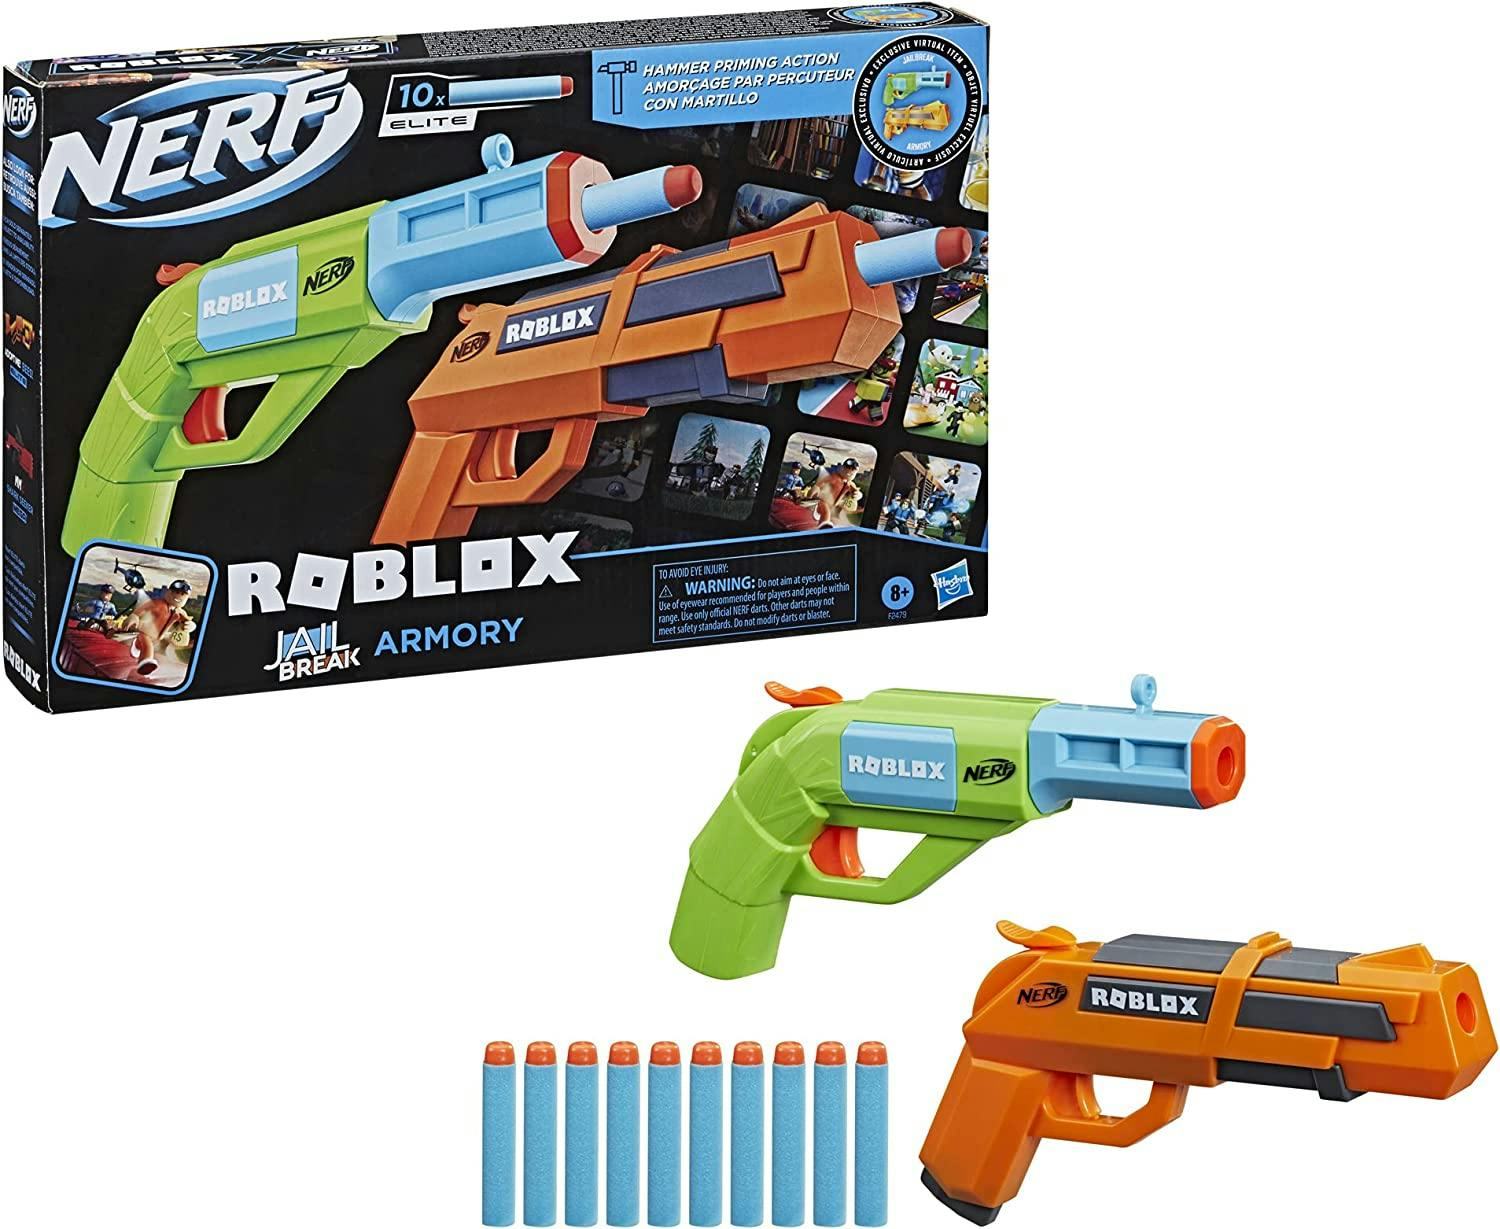 Nerf Gun Sale, Up to 50% Off on Amazon - The Krazy Coupon Lady